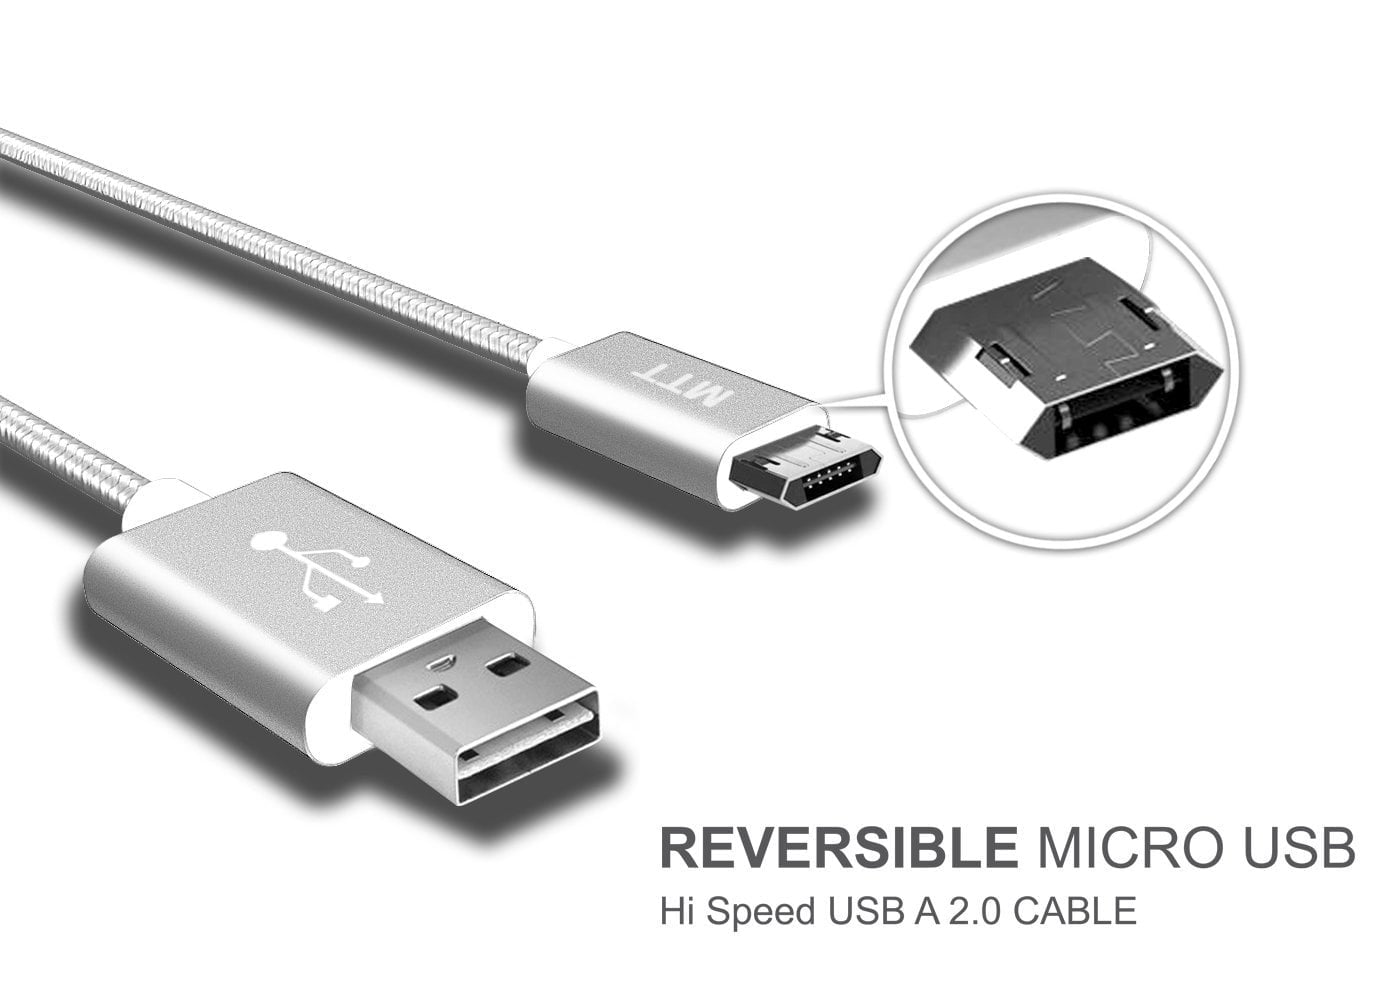 braided usb cable features